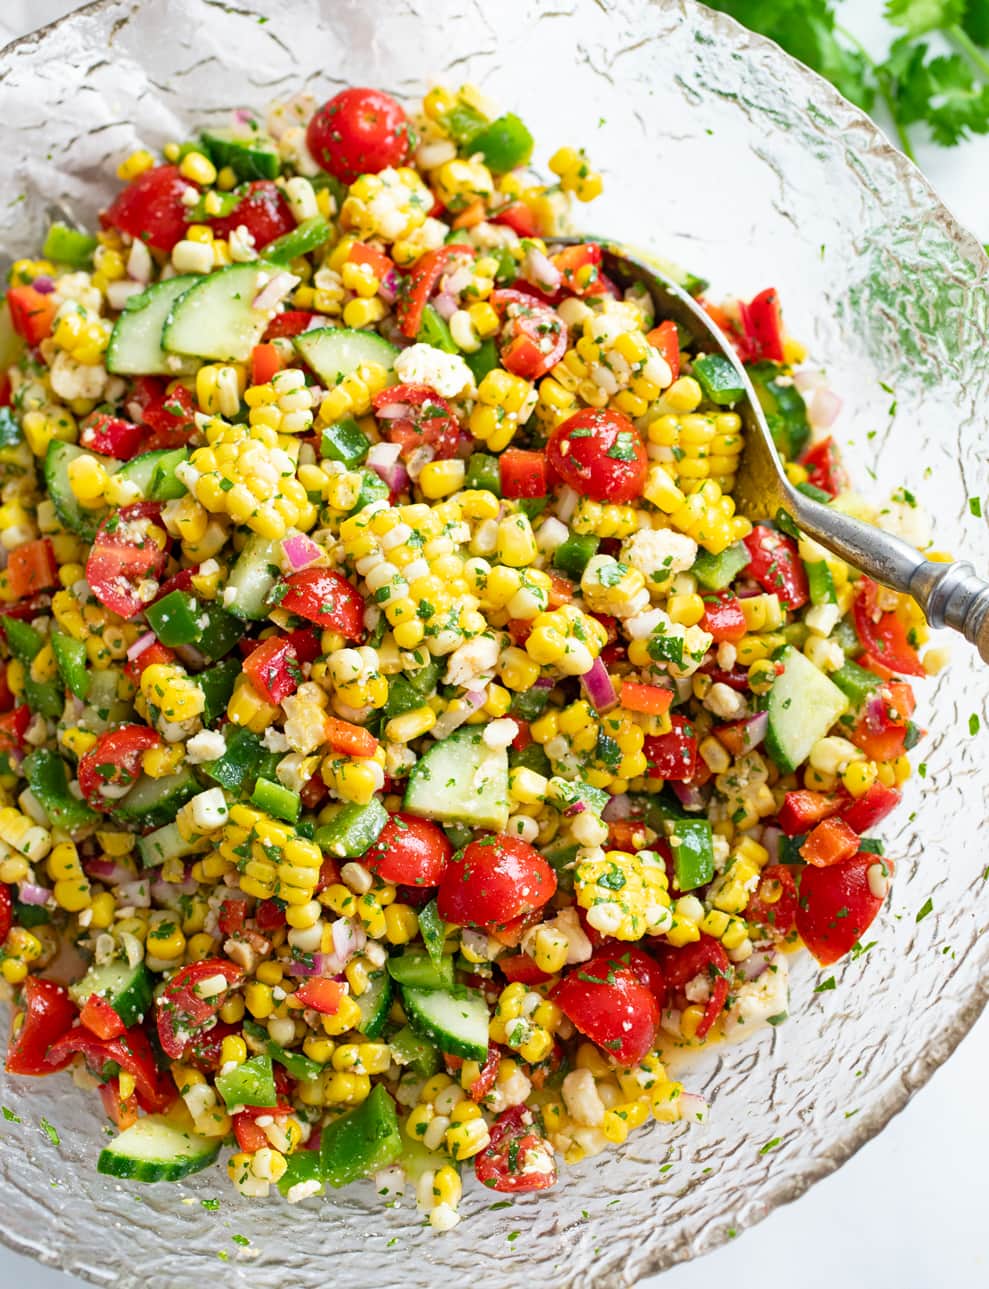 Overhead view of Corn Salad in a glass bowl with a spoon on the side.